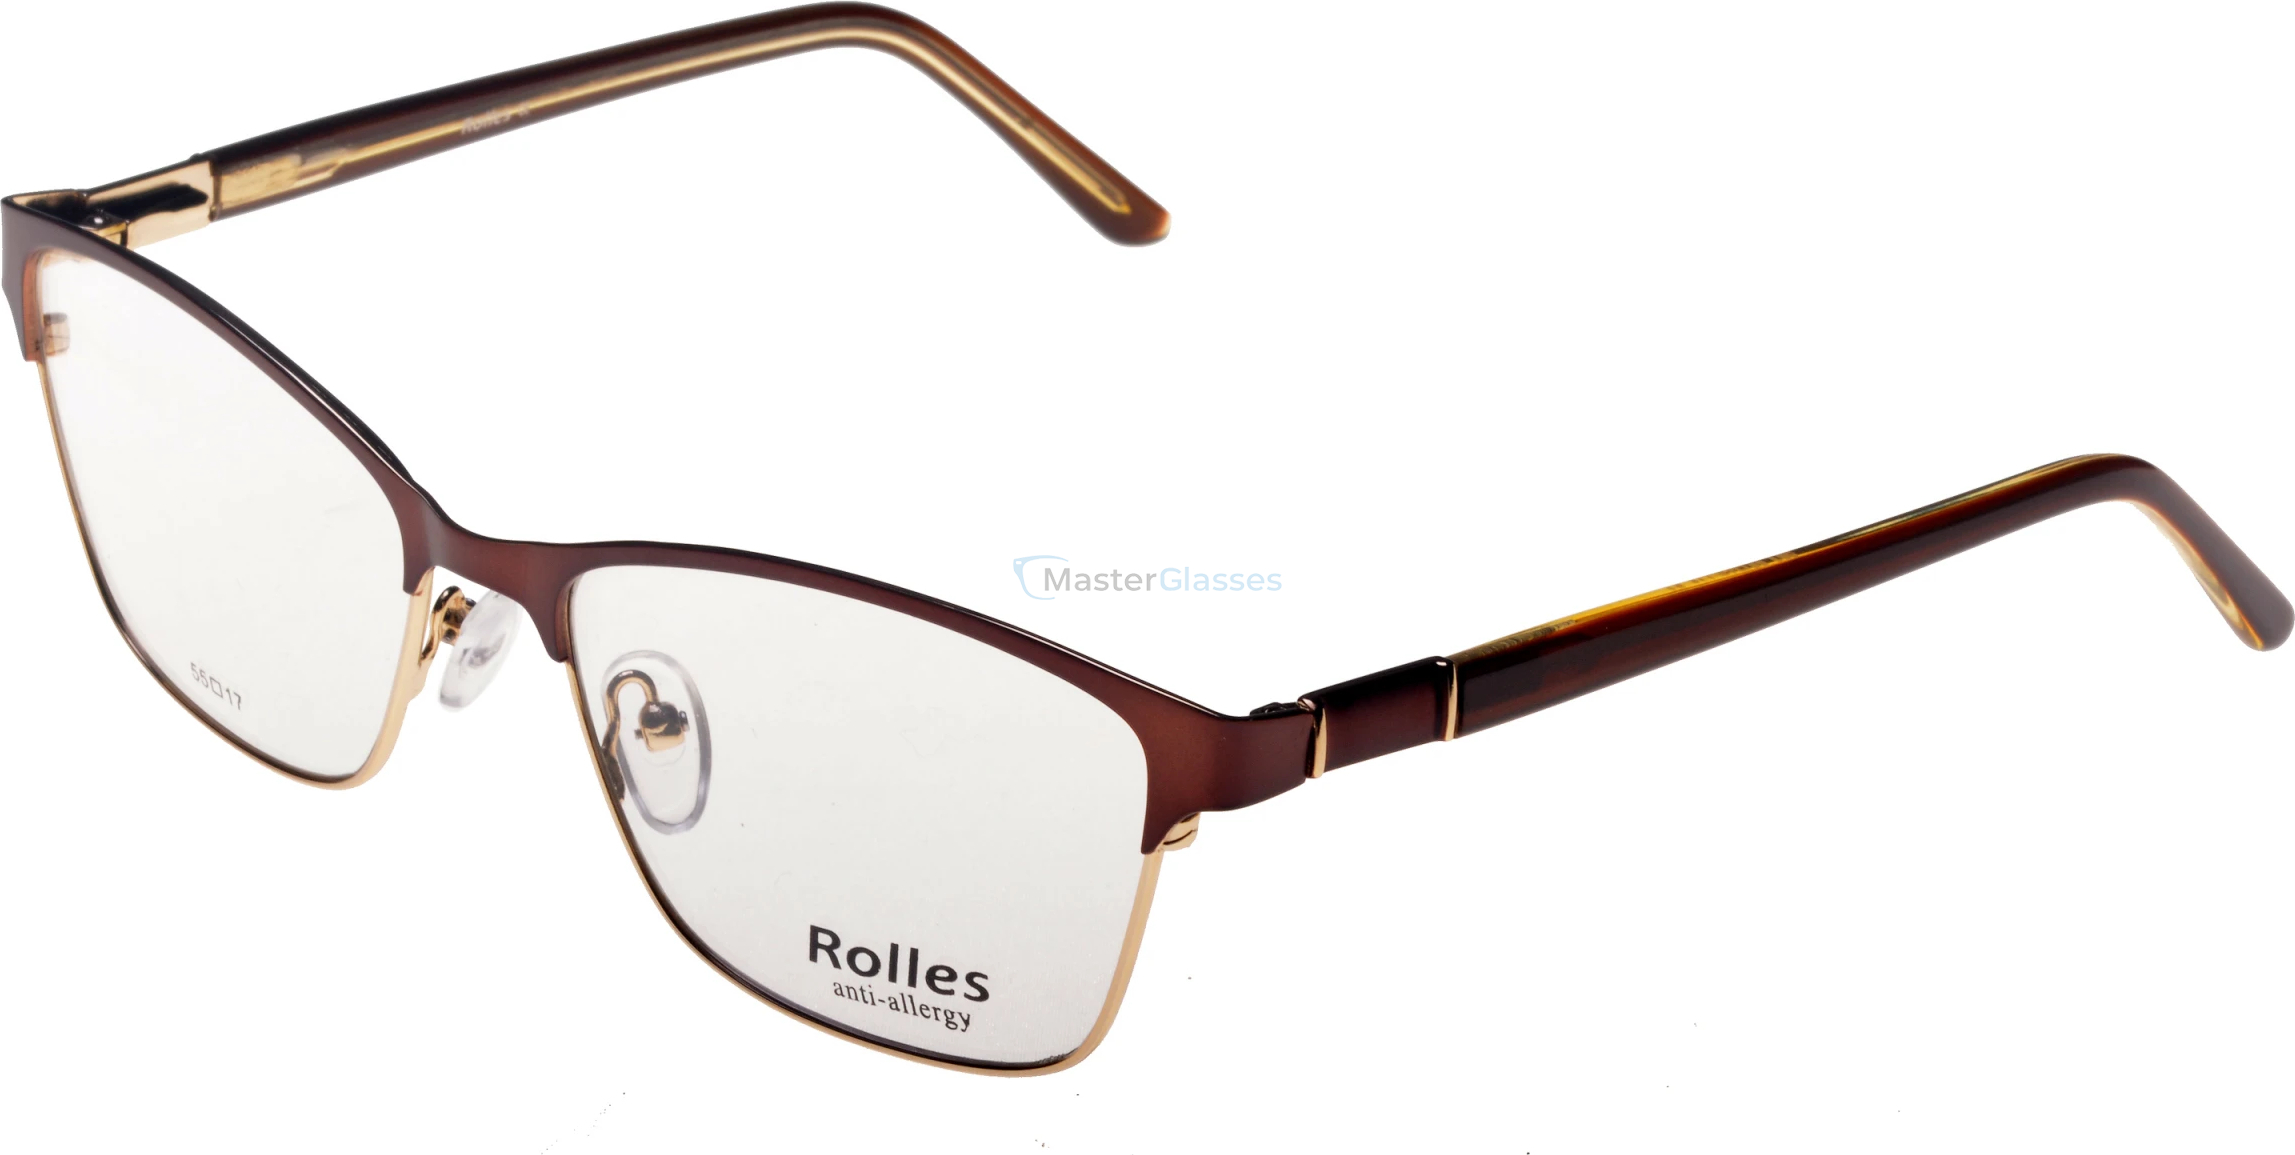  Rolles 583 03